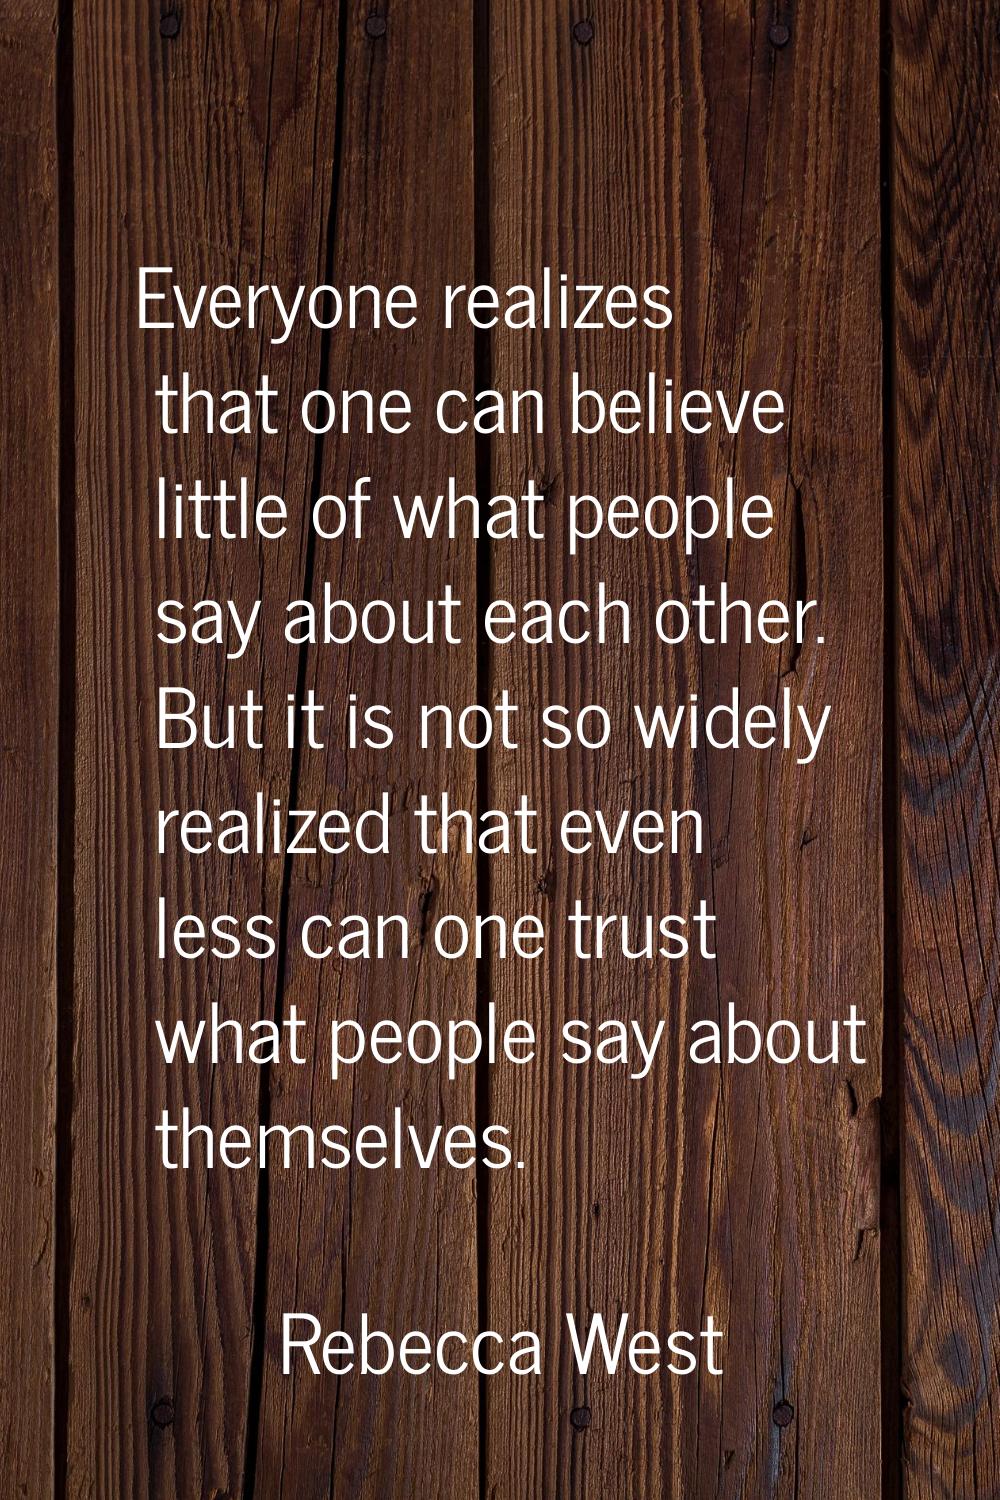 Everyone realizes that one can believe little of what people say about each other. But it is not so